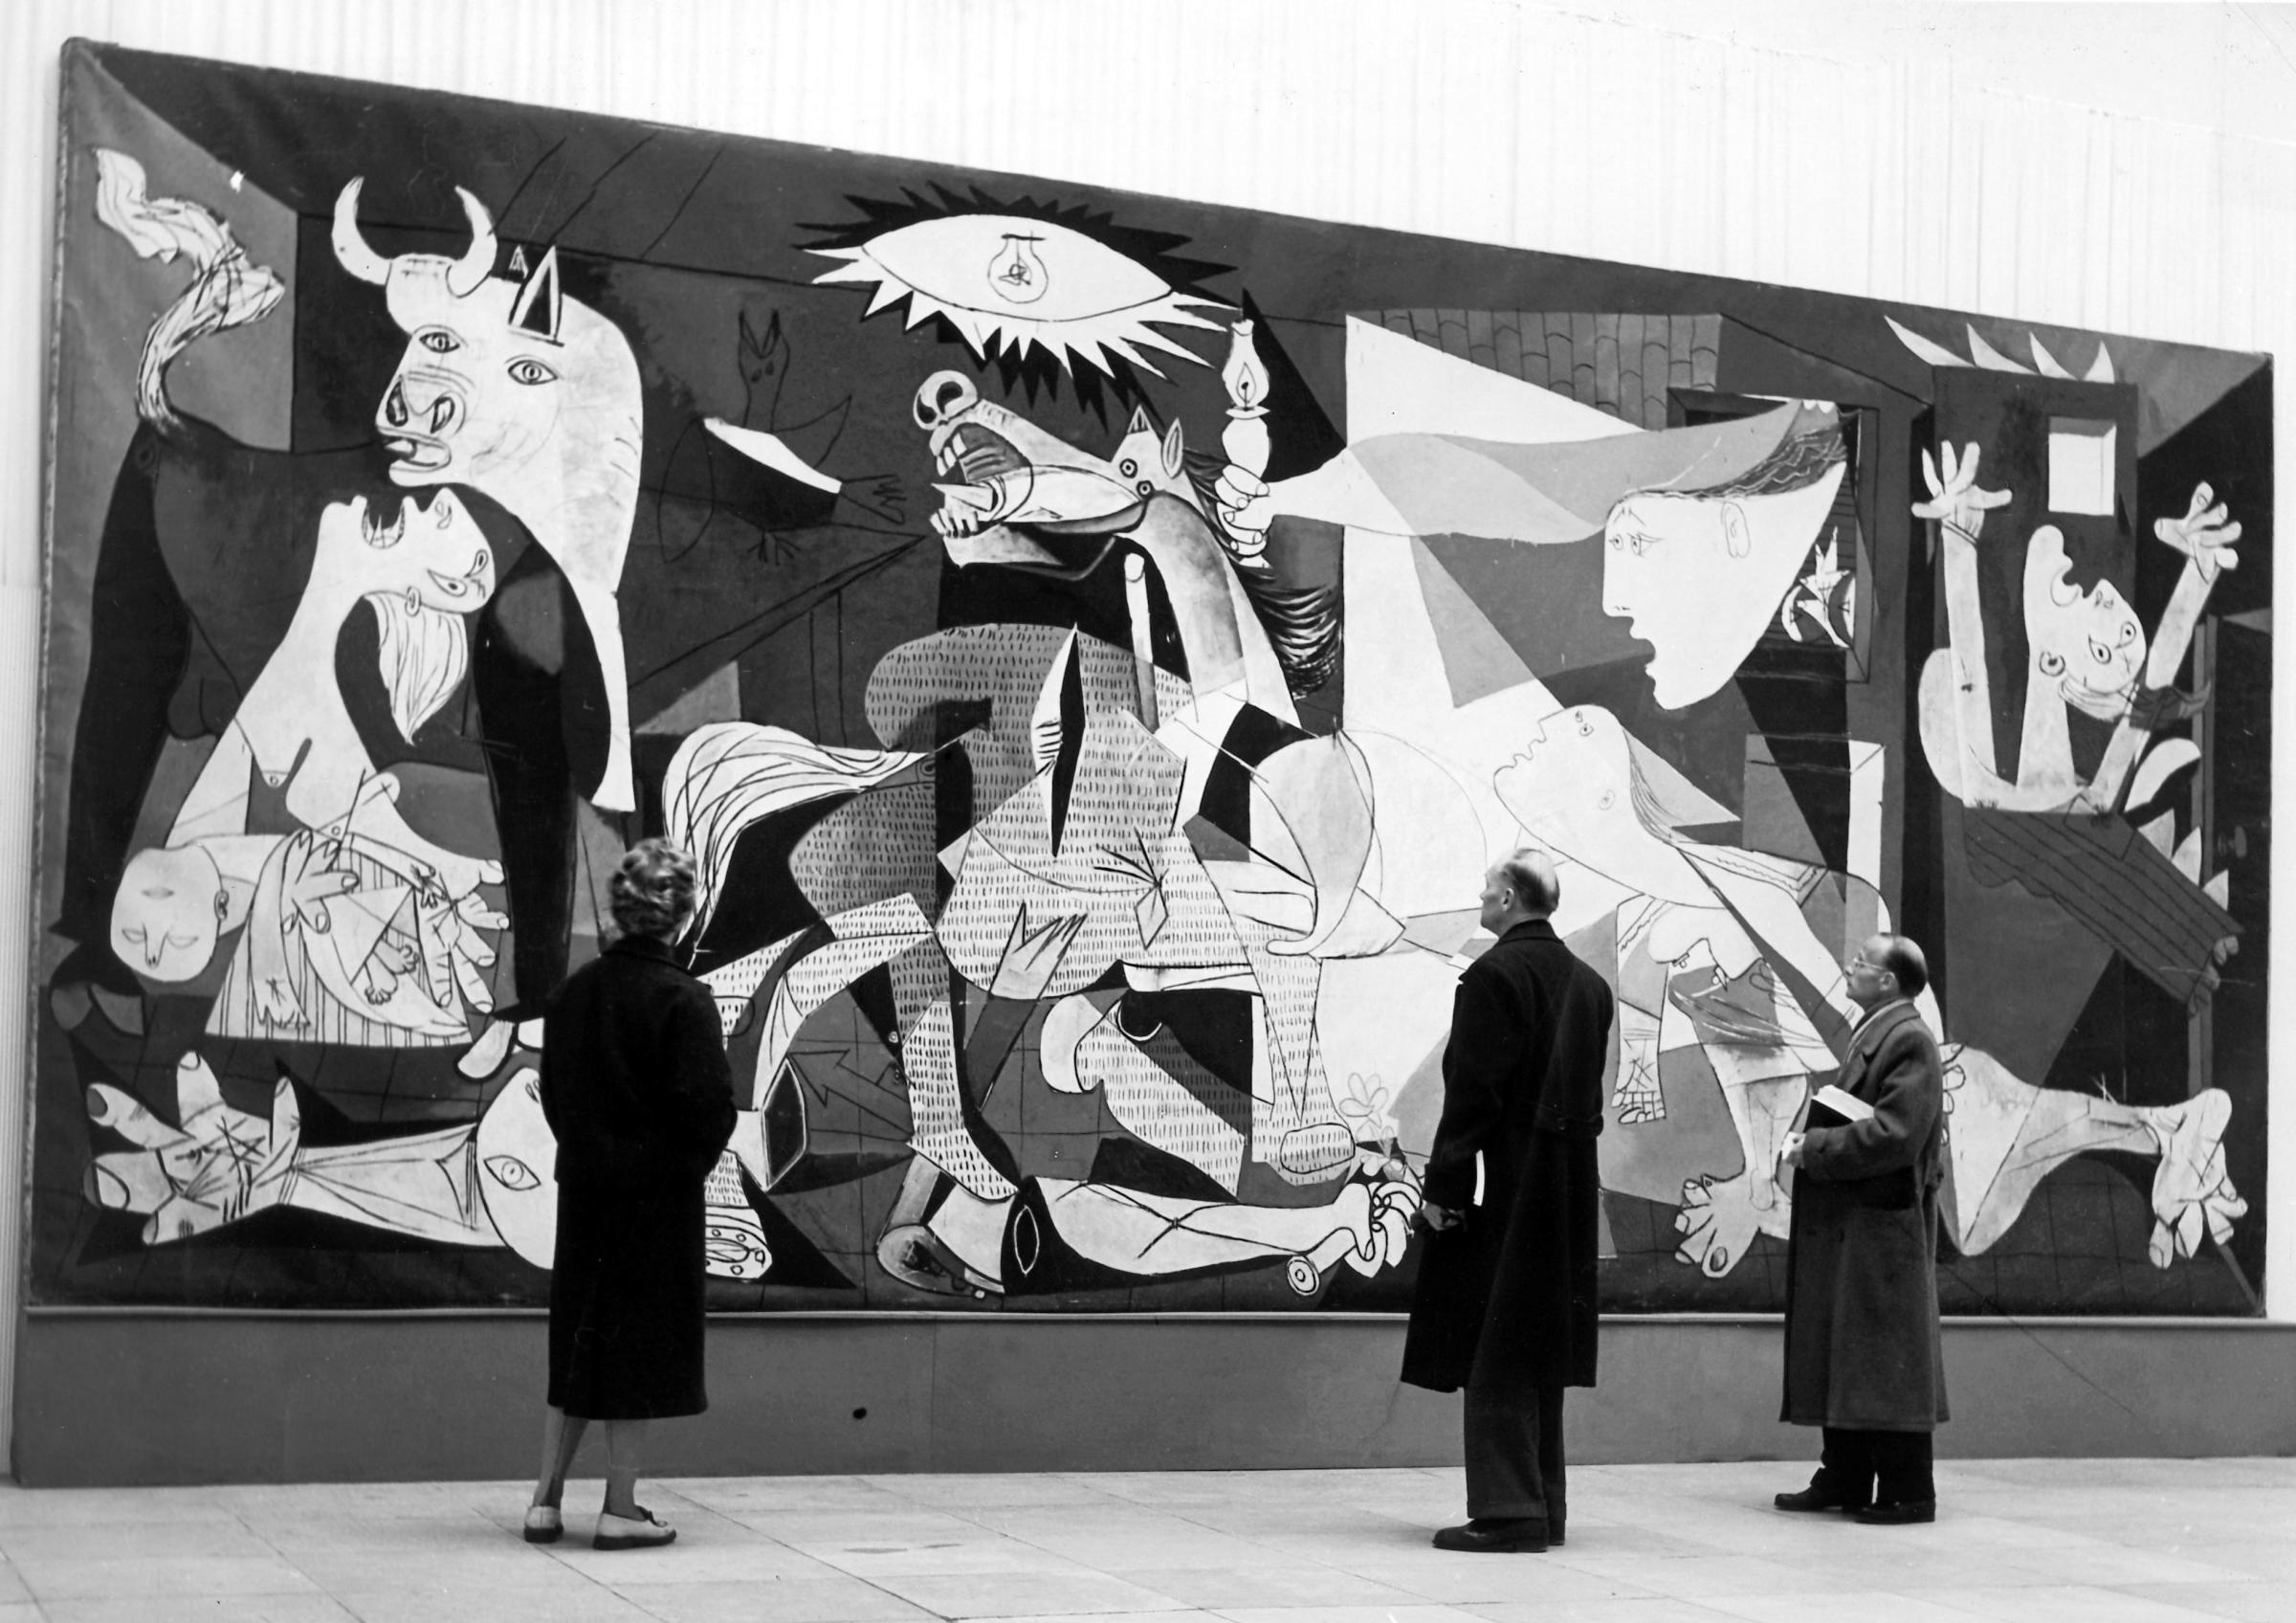 Visitors to the Picasso exhibition in Munich, Germany, in October 1955 look at the famous painting 'La Guernica' by Pablo Picasso.